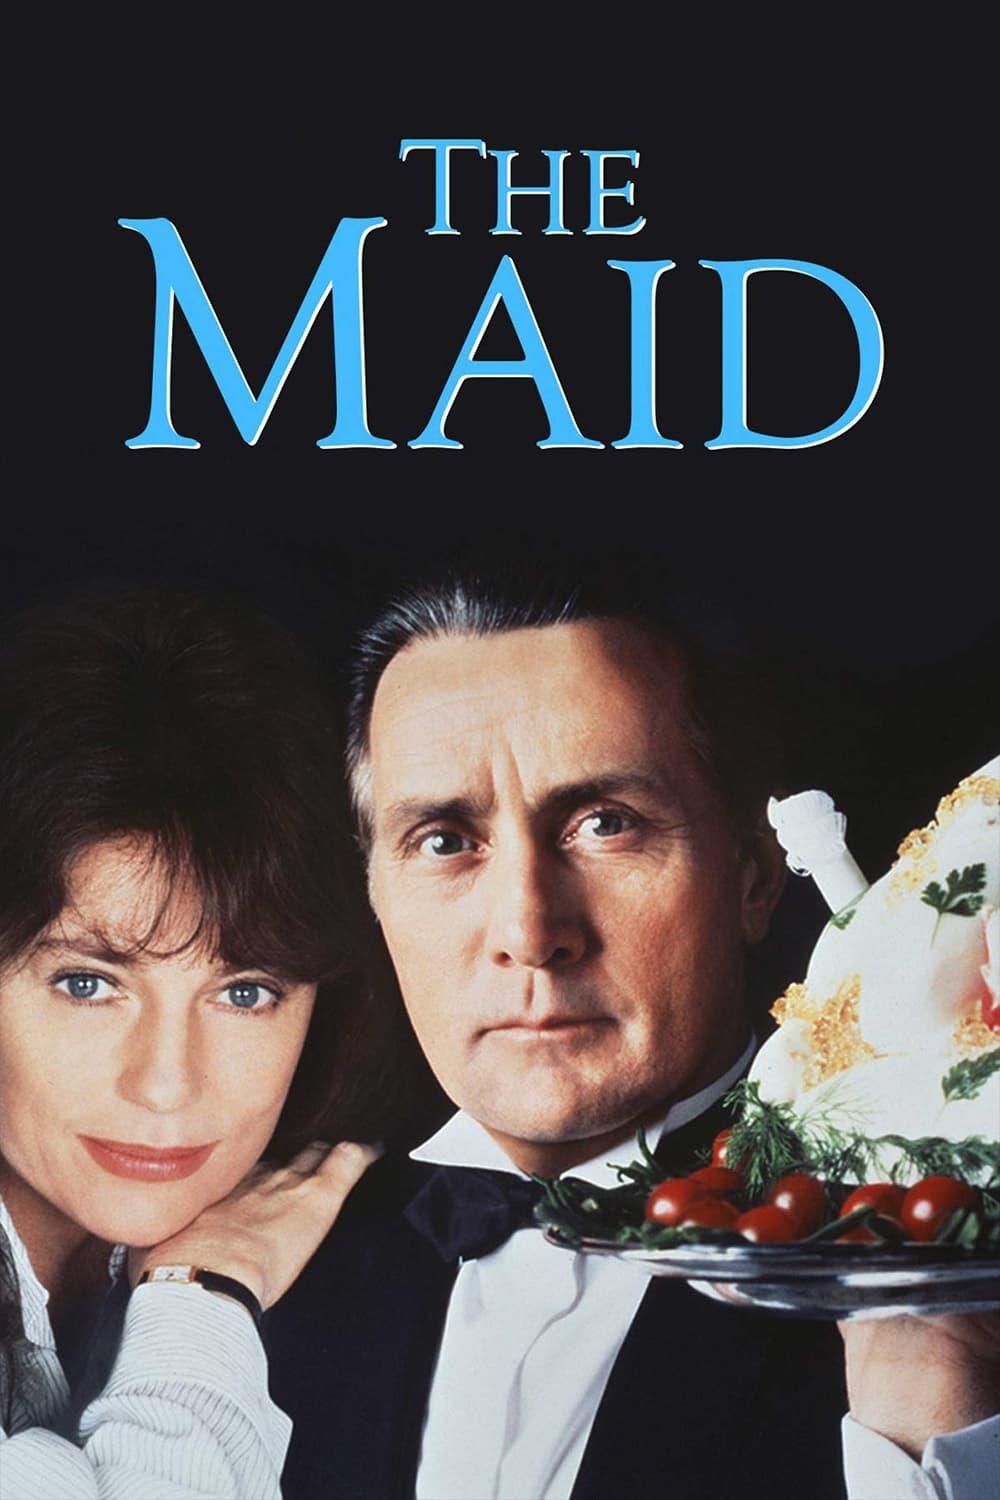 The Maid poster